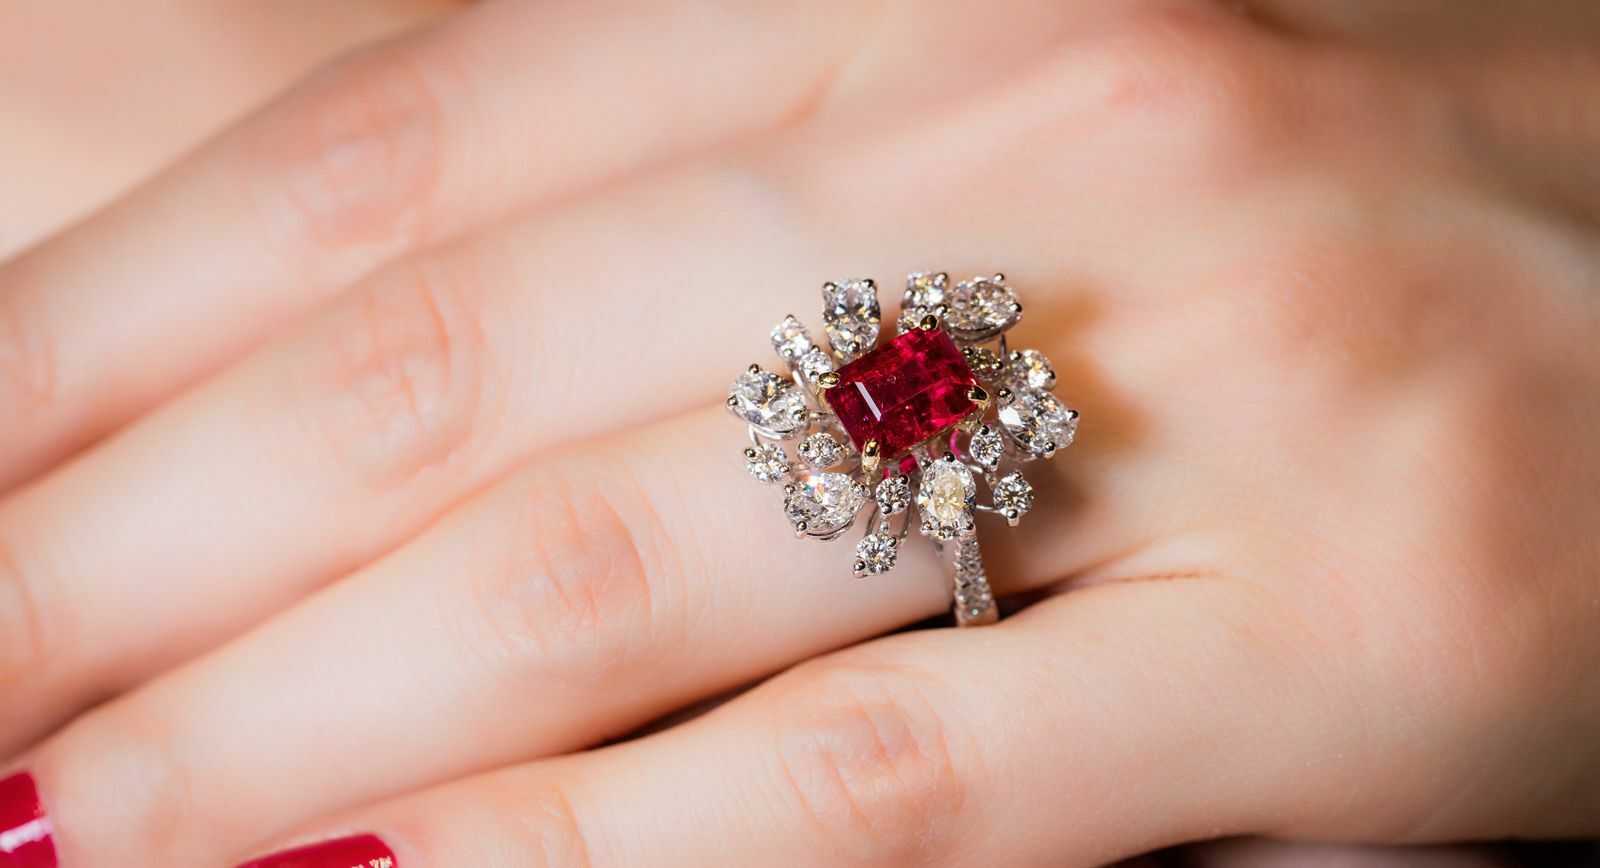 Caratell bixbite ring with red beryl and diamonds